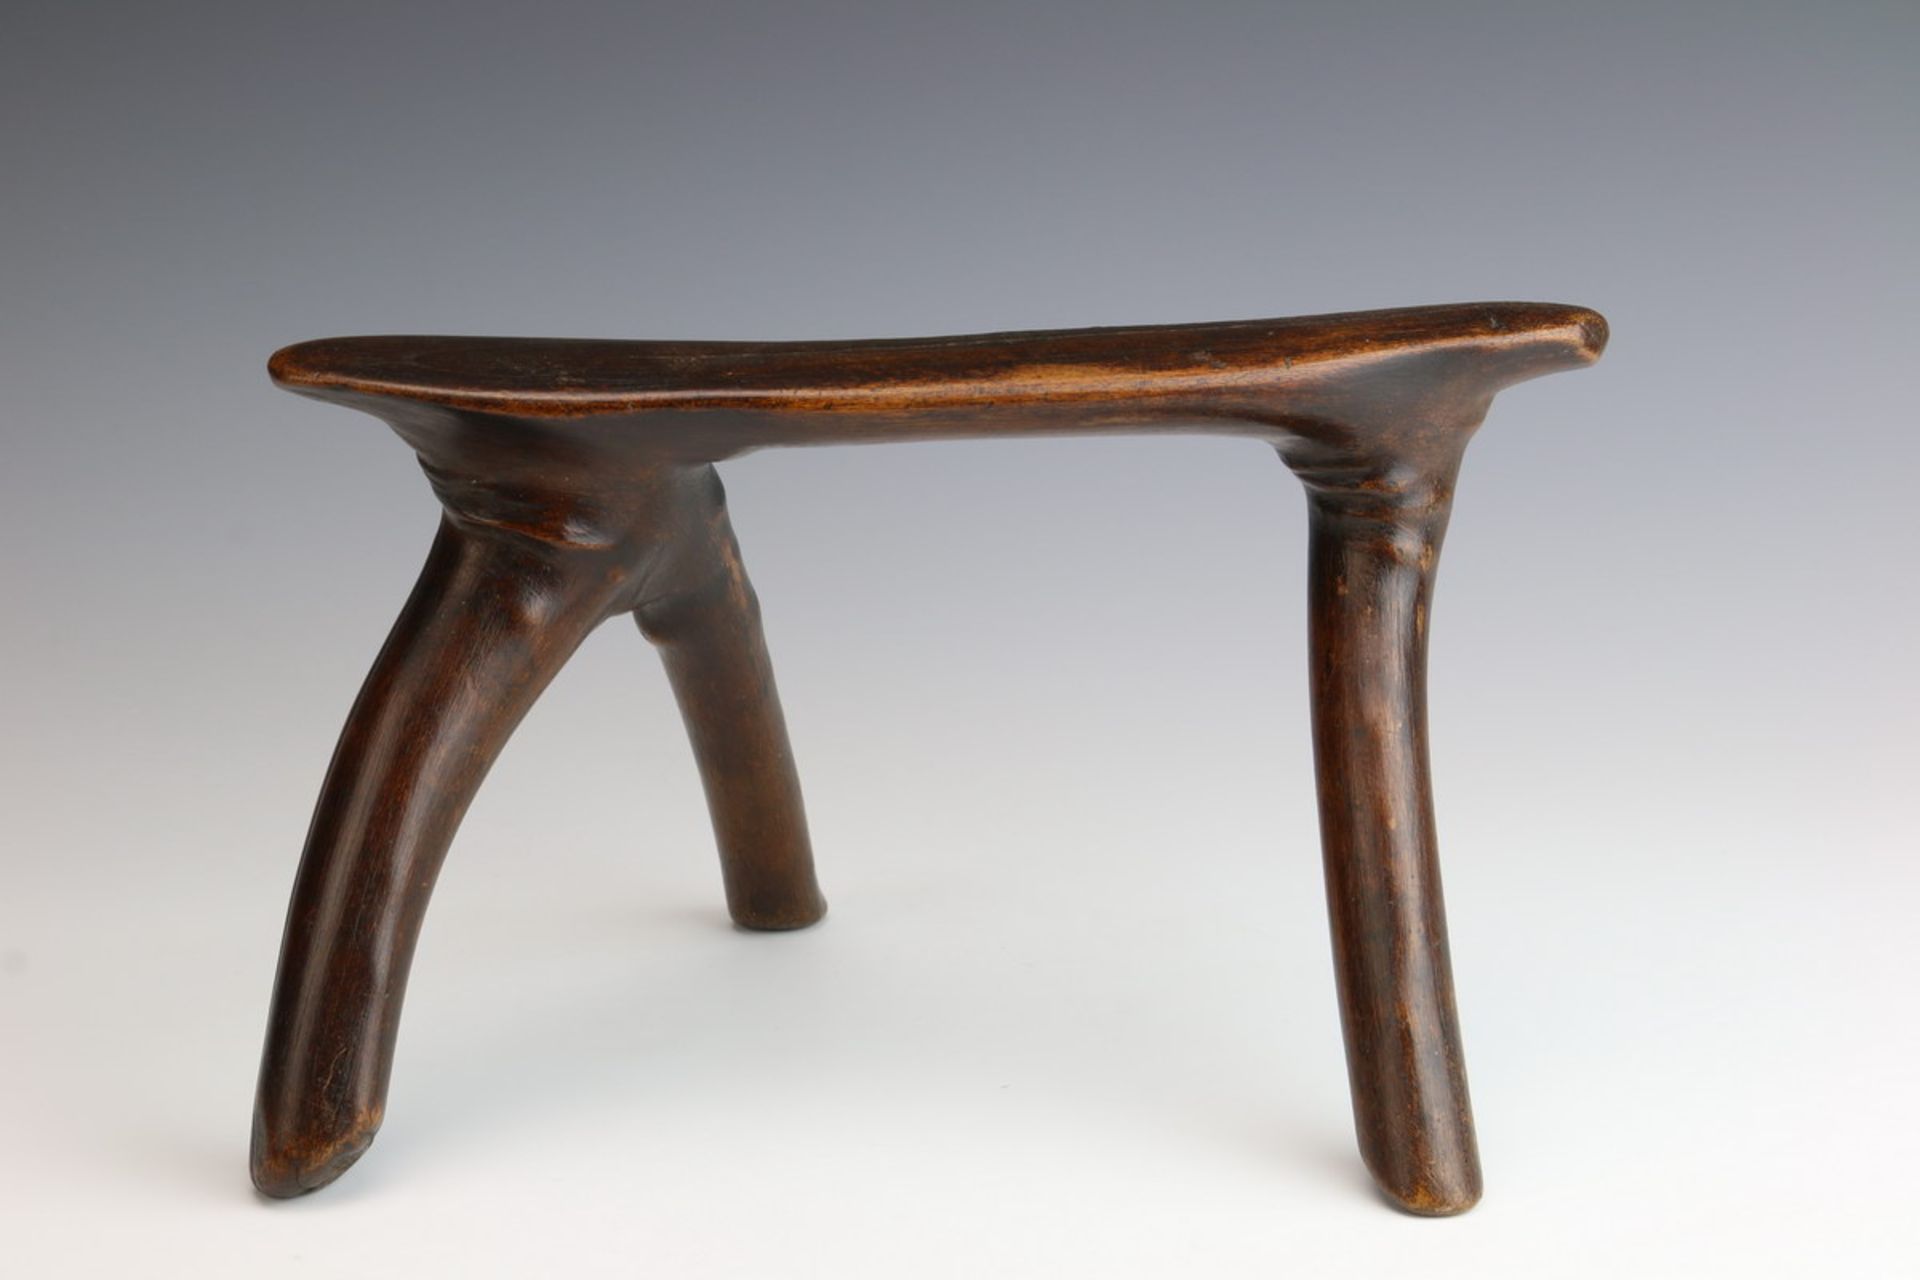 South Sudan, Dinka, wooden neckrest,with three curved legs. With glossy dark brown patina. Private - Bild 3 aus 4